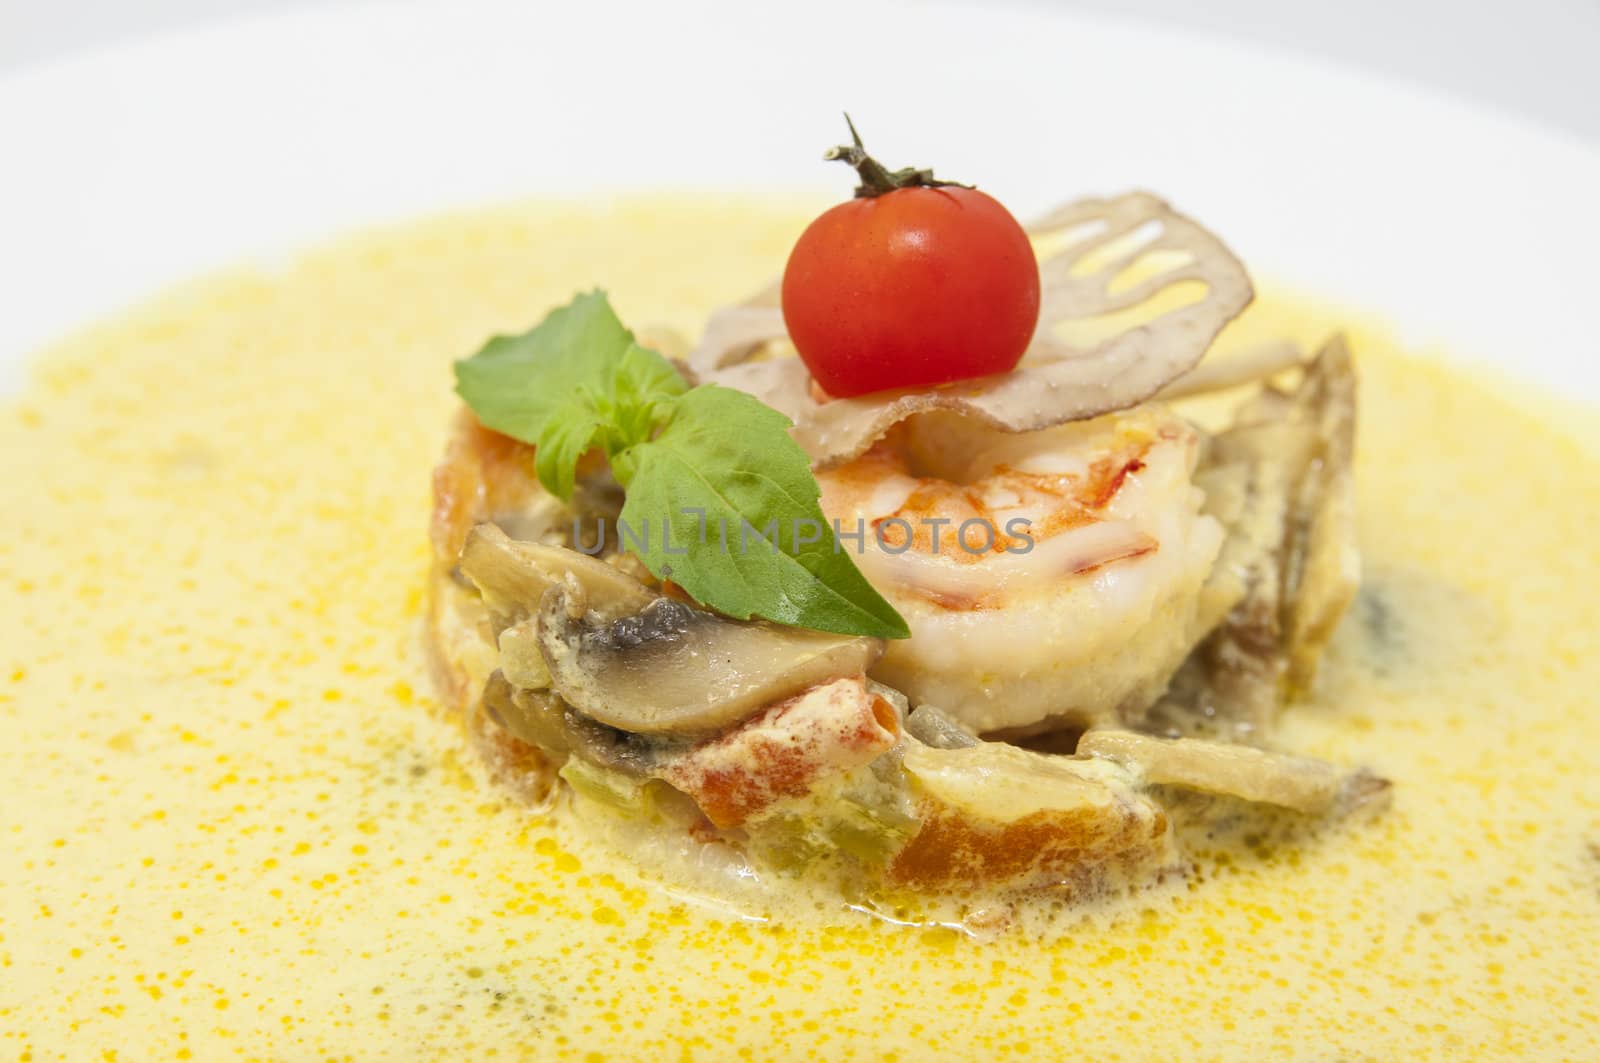 Shrimp soup puree of mushrooms and vegetables